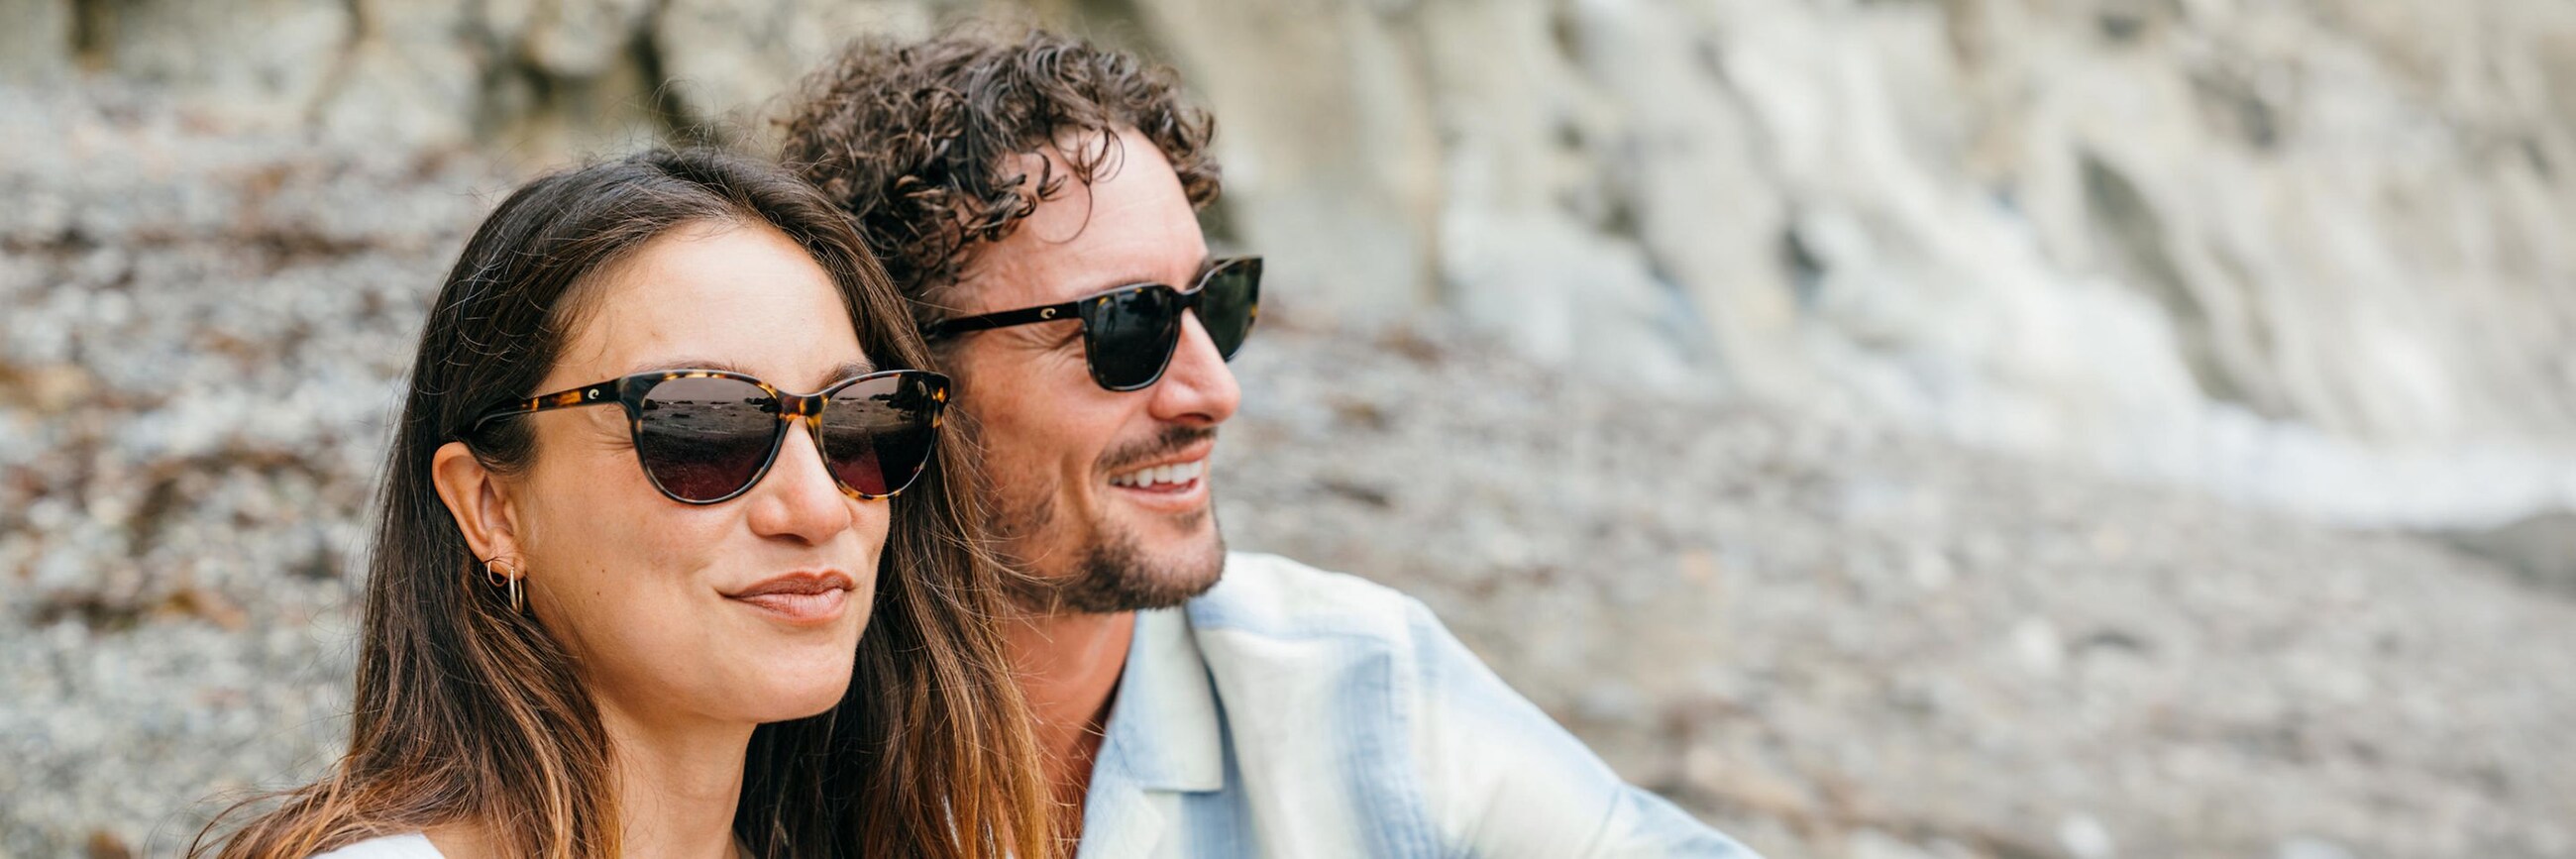 Coastal Classics-MEET KAILANO & CATHERINE-Discover new frames in the Del Mar Collection, crafted with responsible materials that reflect your coastal lifestyle.